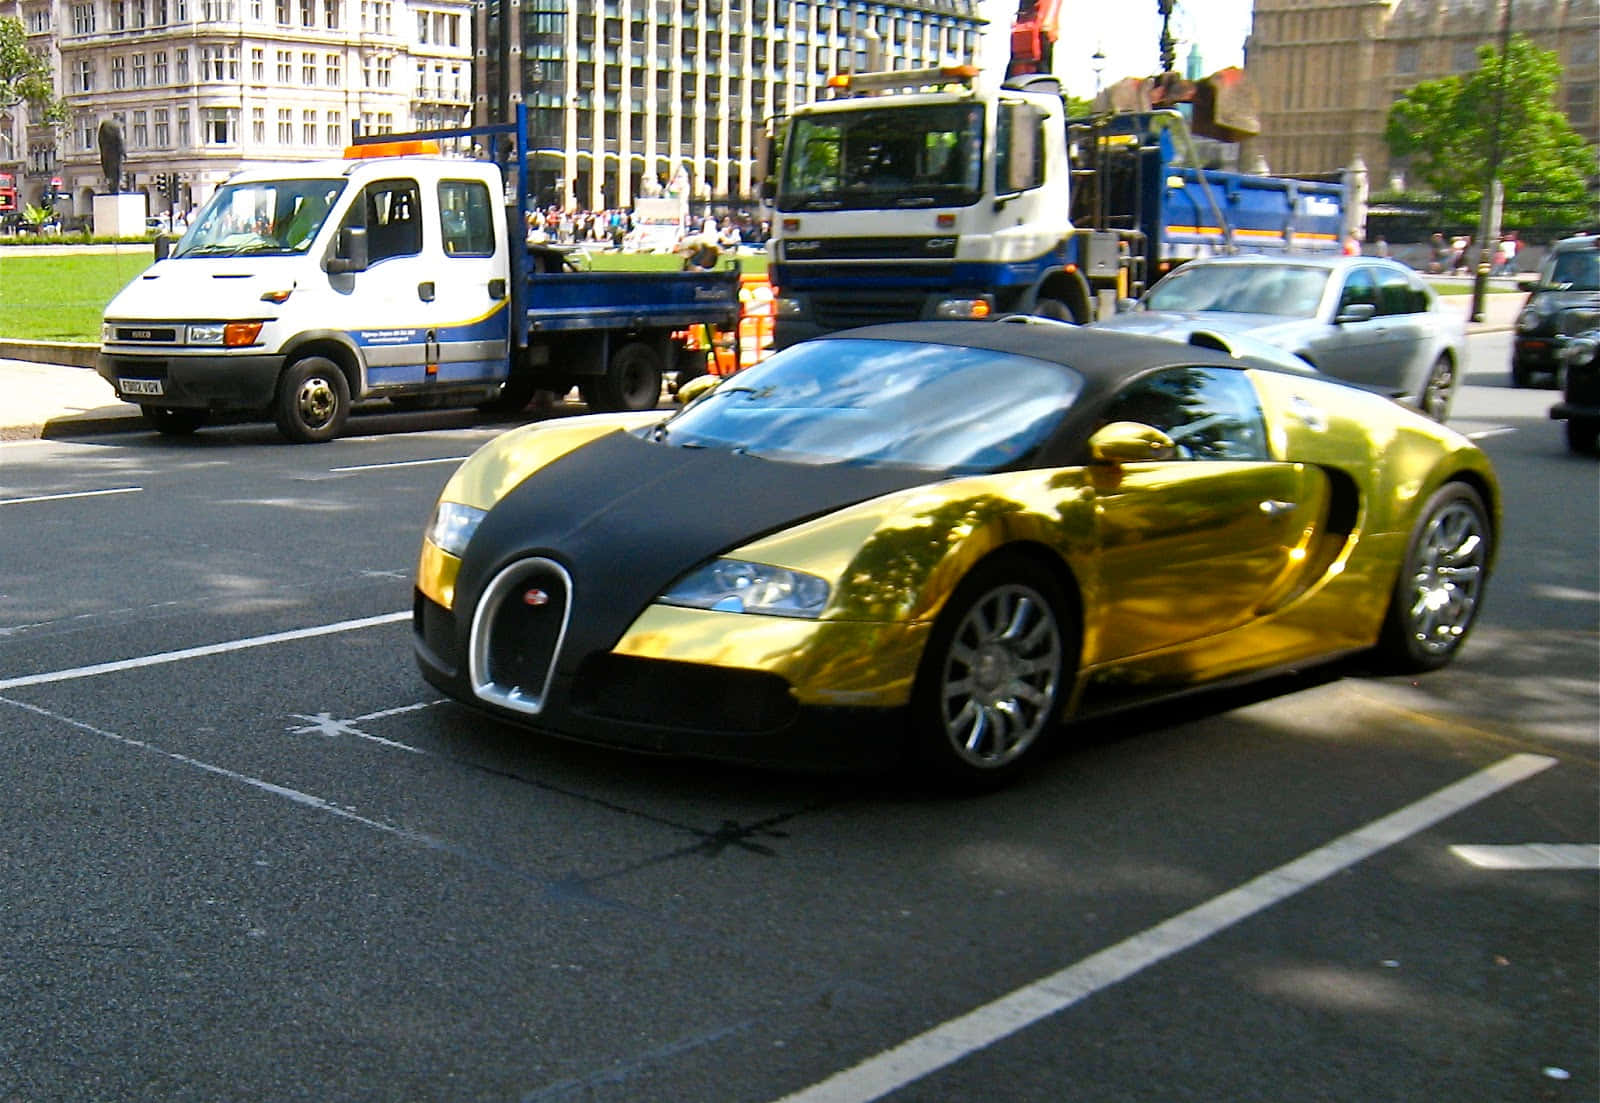 Luxury meets power with the iconic Gold Bugatti Veyron Wallpaper